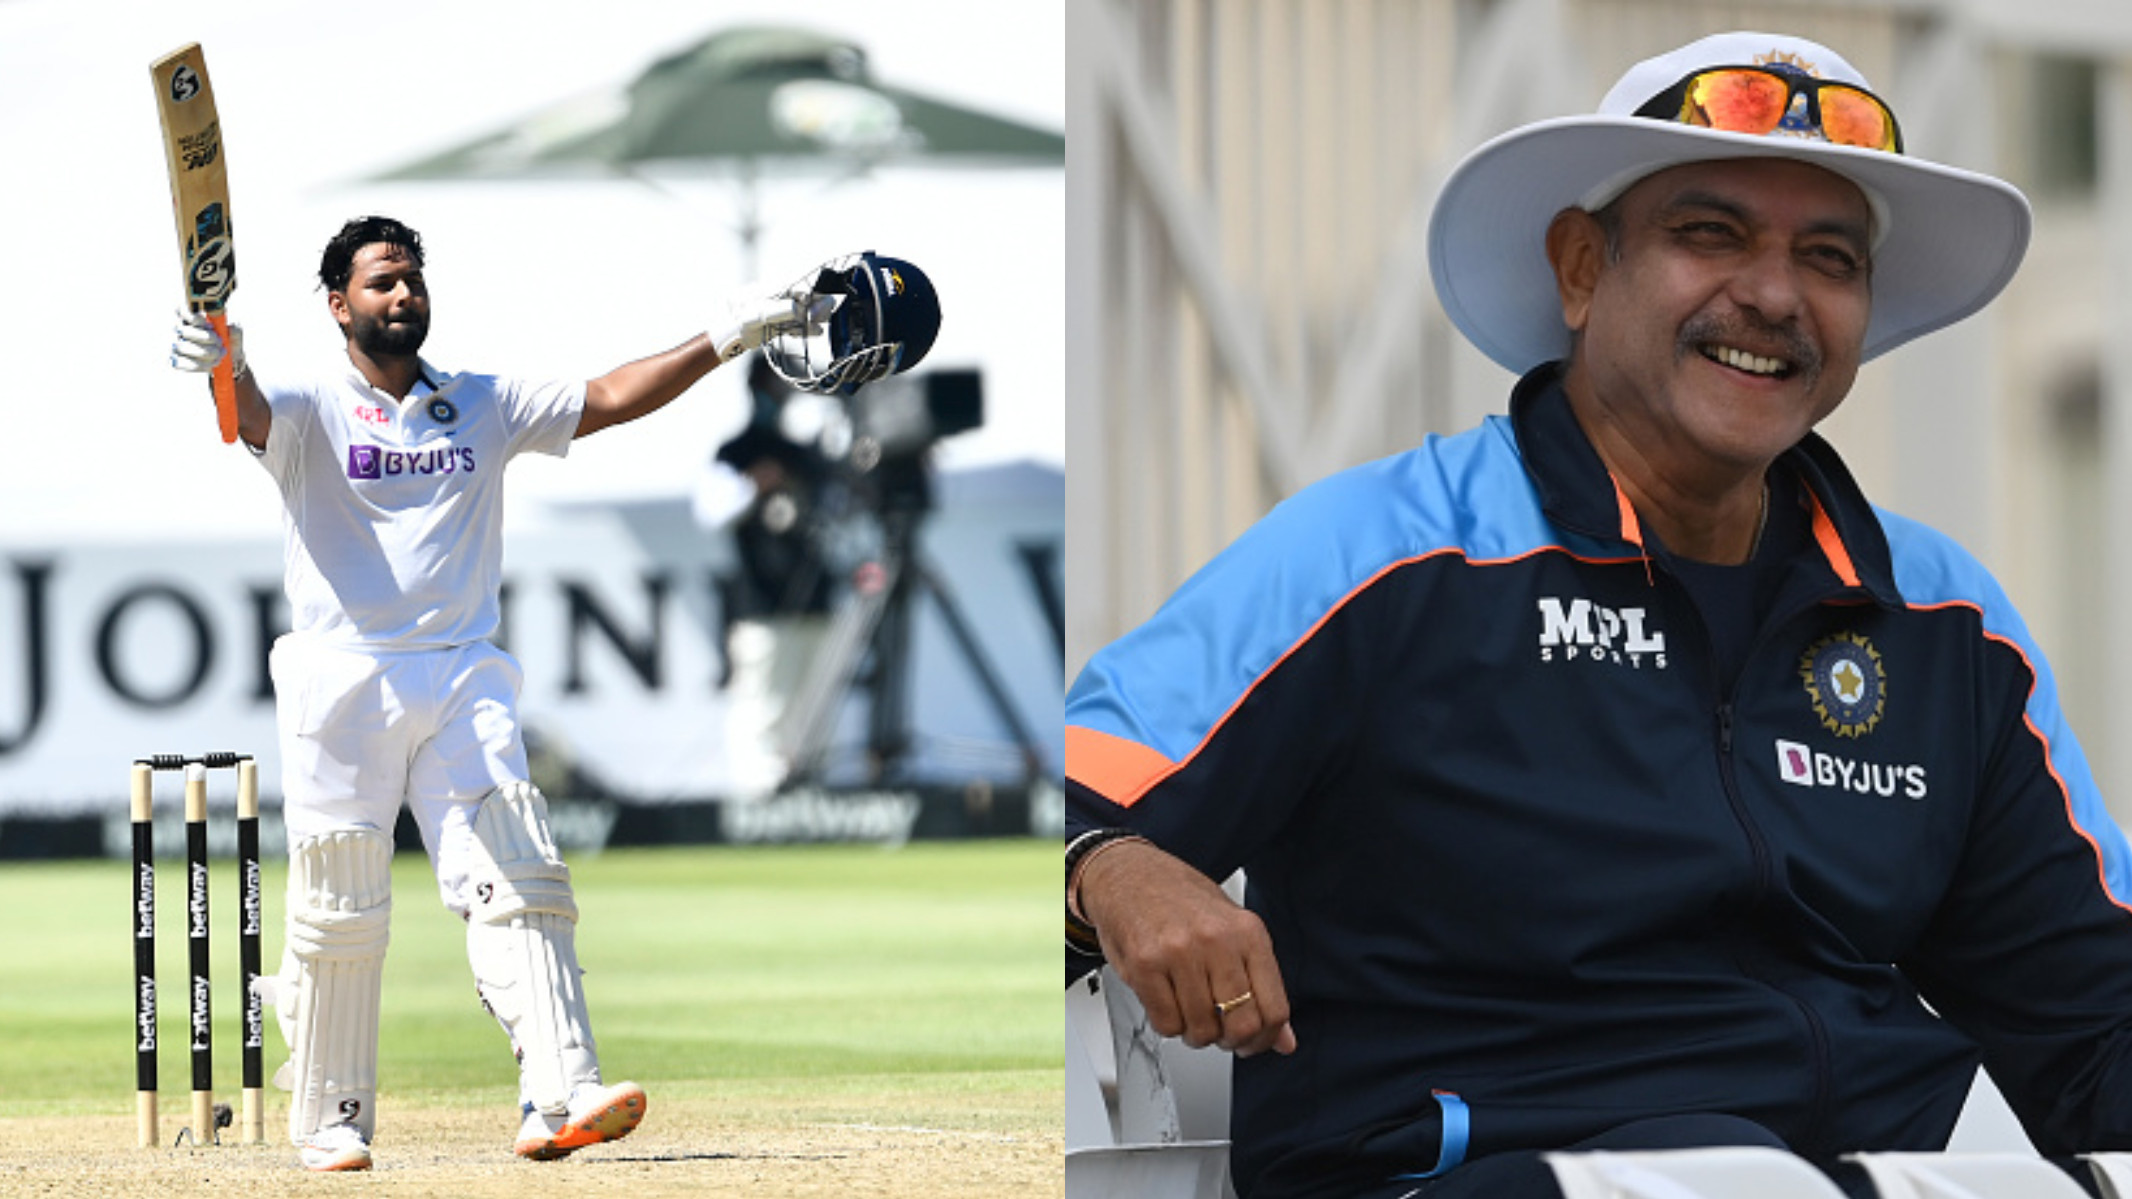 SA v IND 2021-22: “A hundred of sheer daring brilliance and class” - Shastri lauds Rishabh Pant for his unbeaten 100